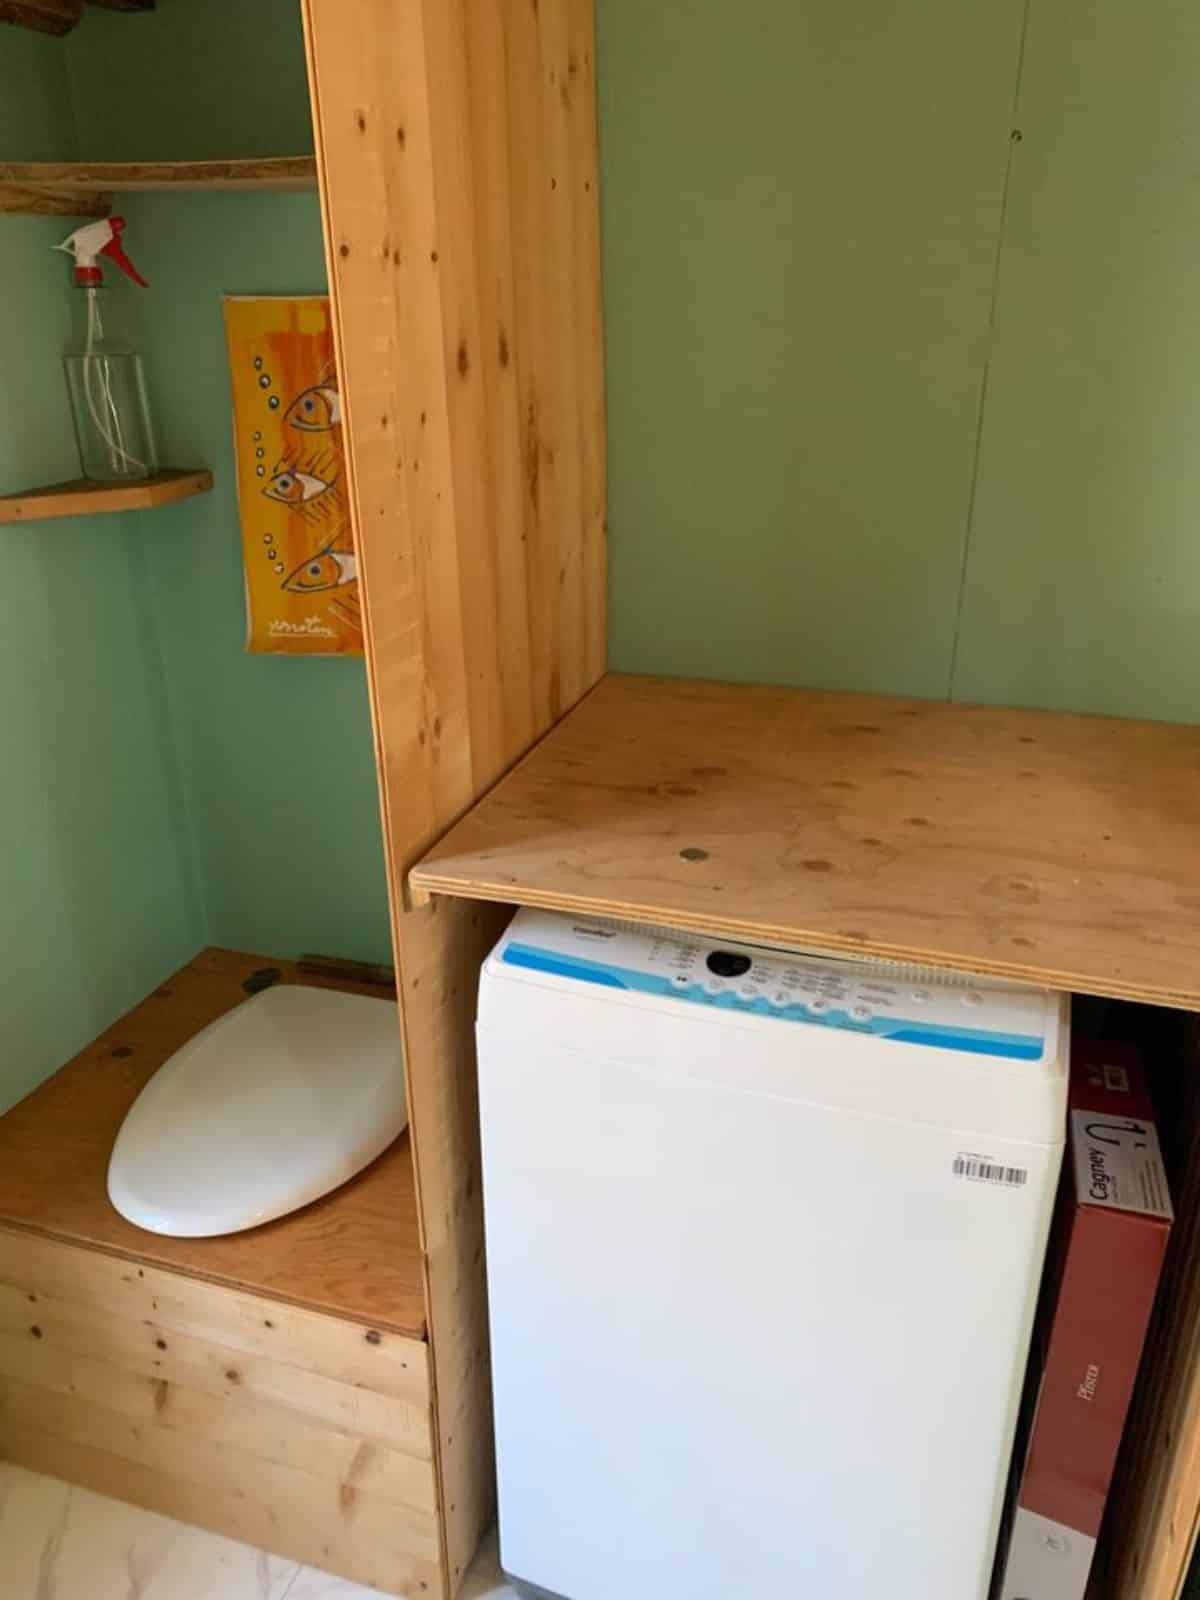 composting toilet and washer dryer in bathroom of rustic 28’ tiny home